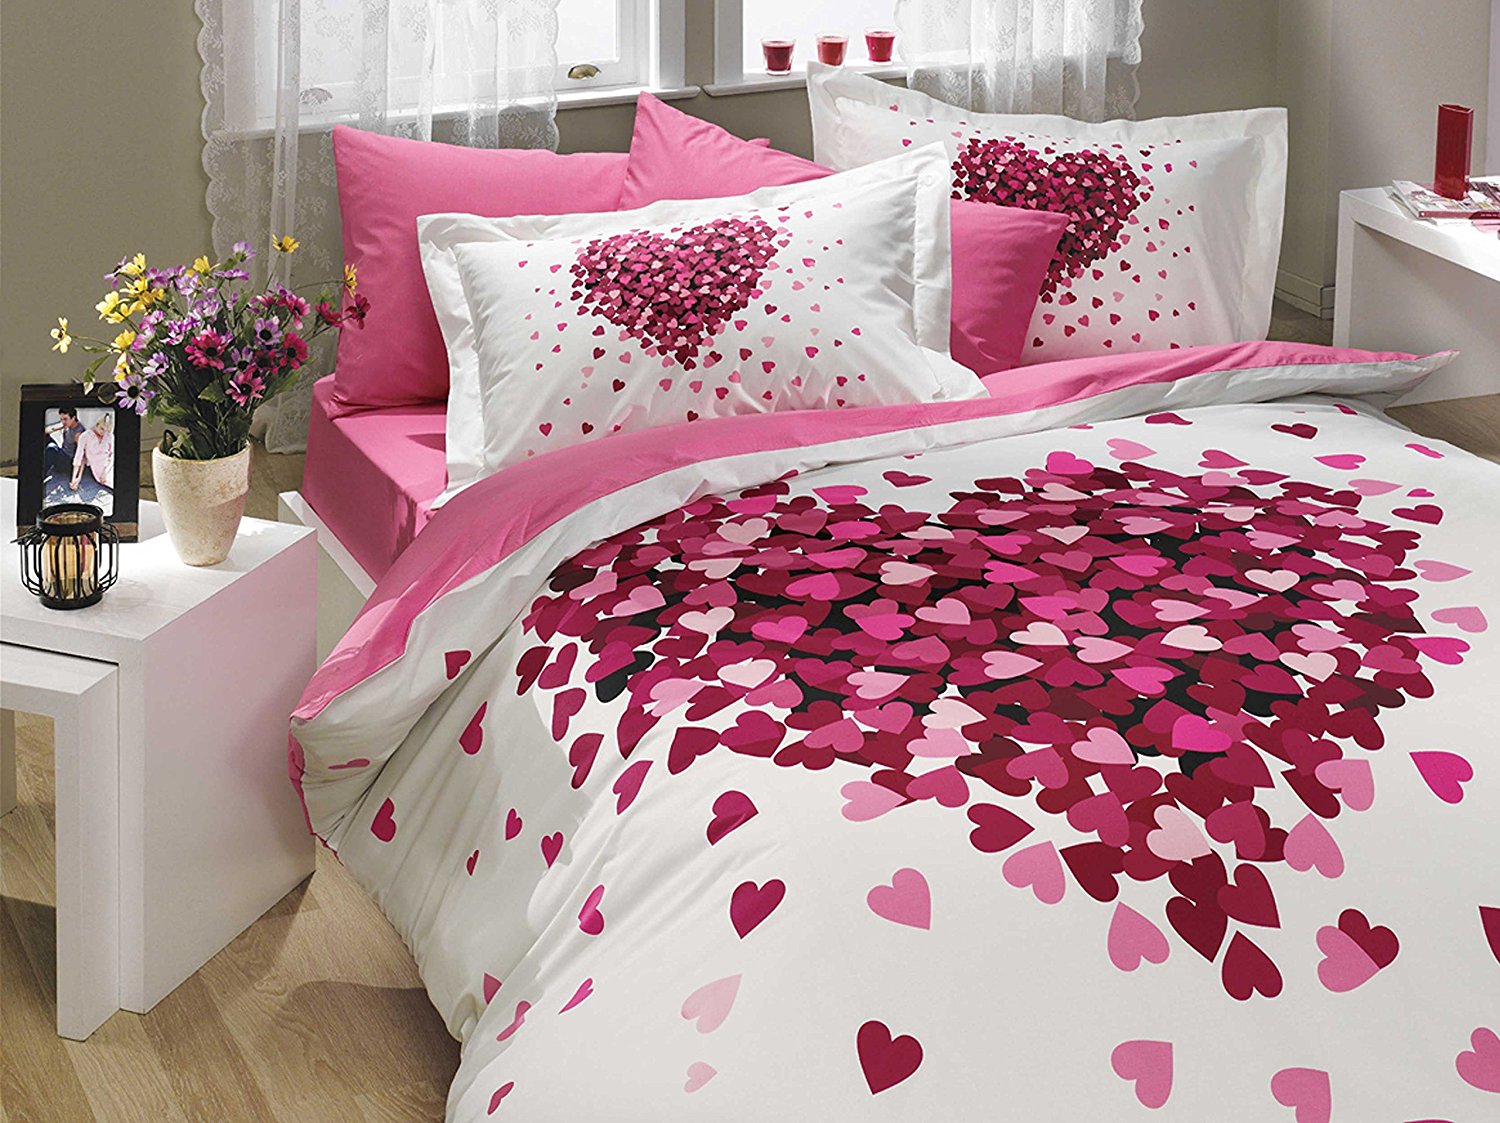 3 Decorating Choices For A Love Themed Bedroom